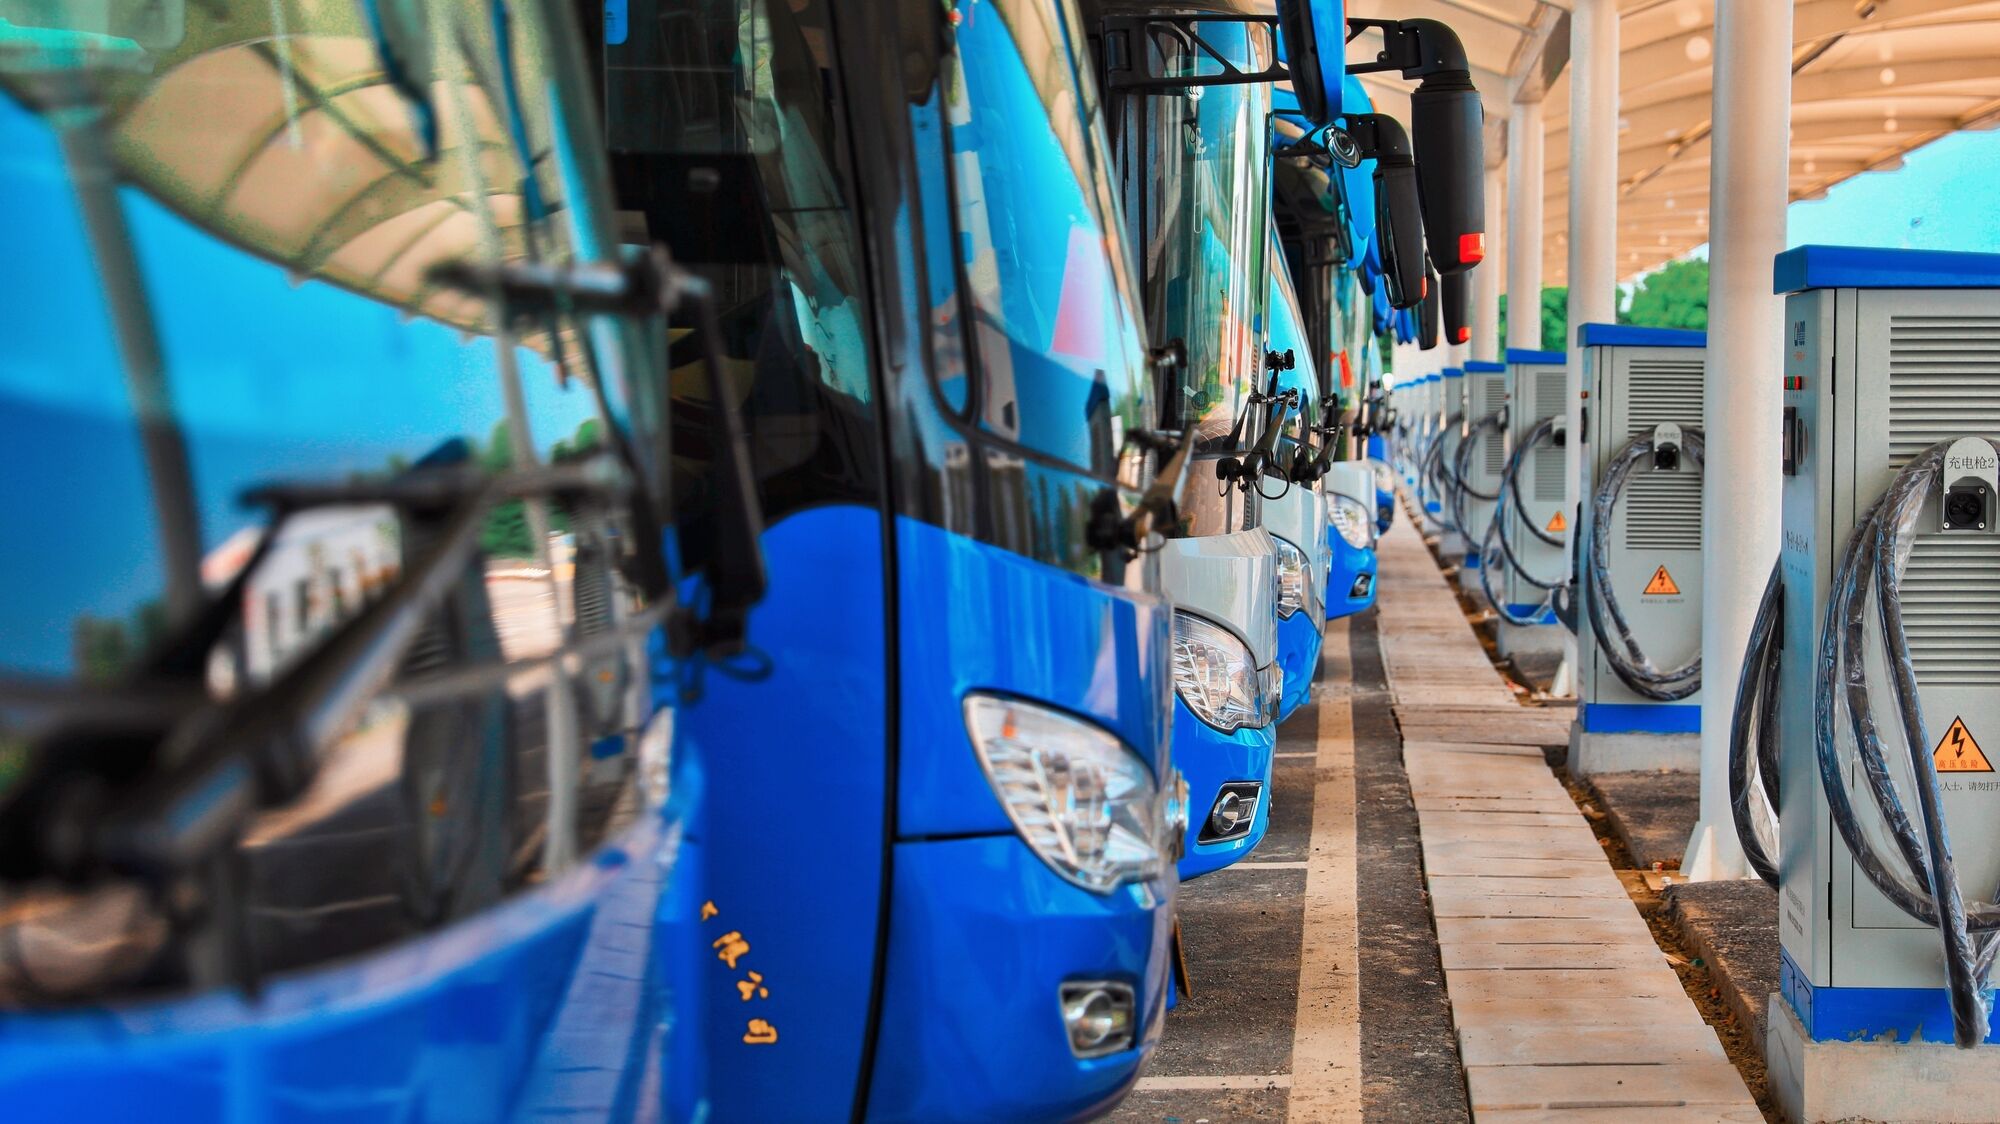 Fleet of buses next to charging stations